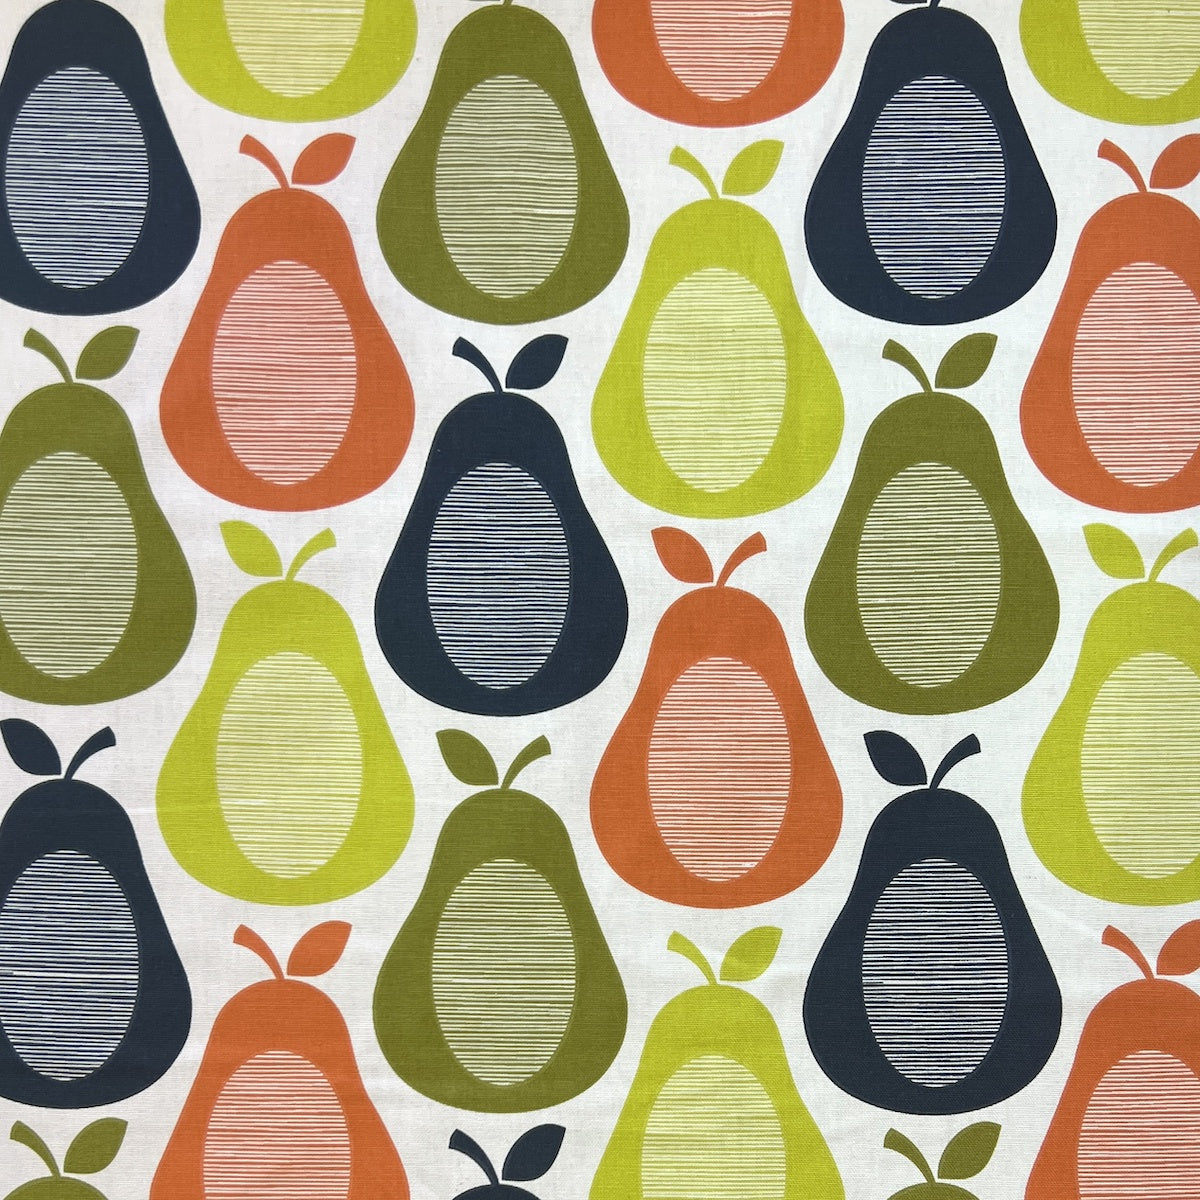 Scribble Pears Fabric